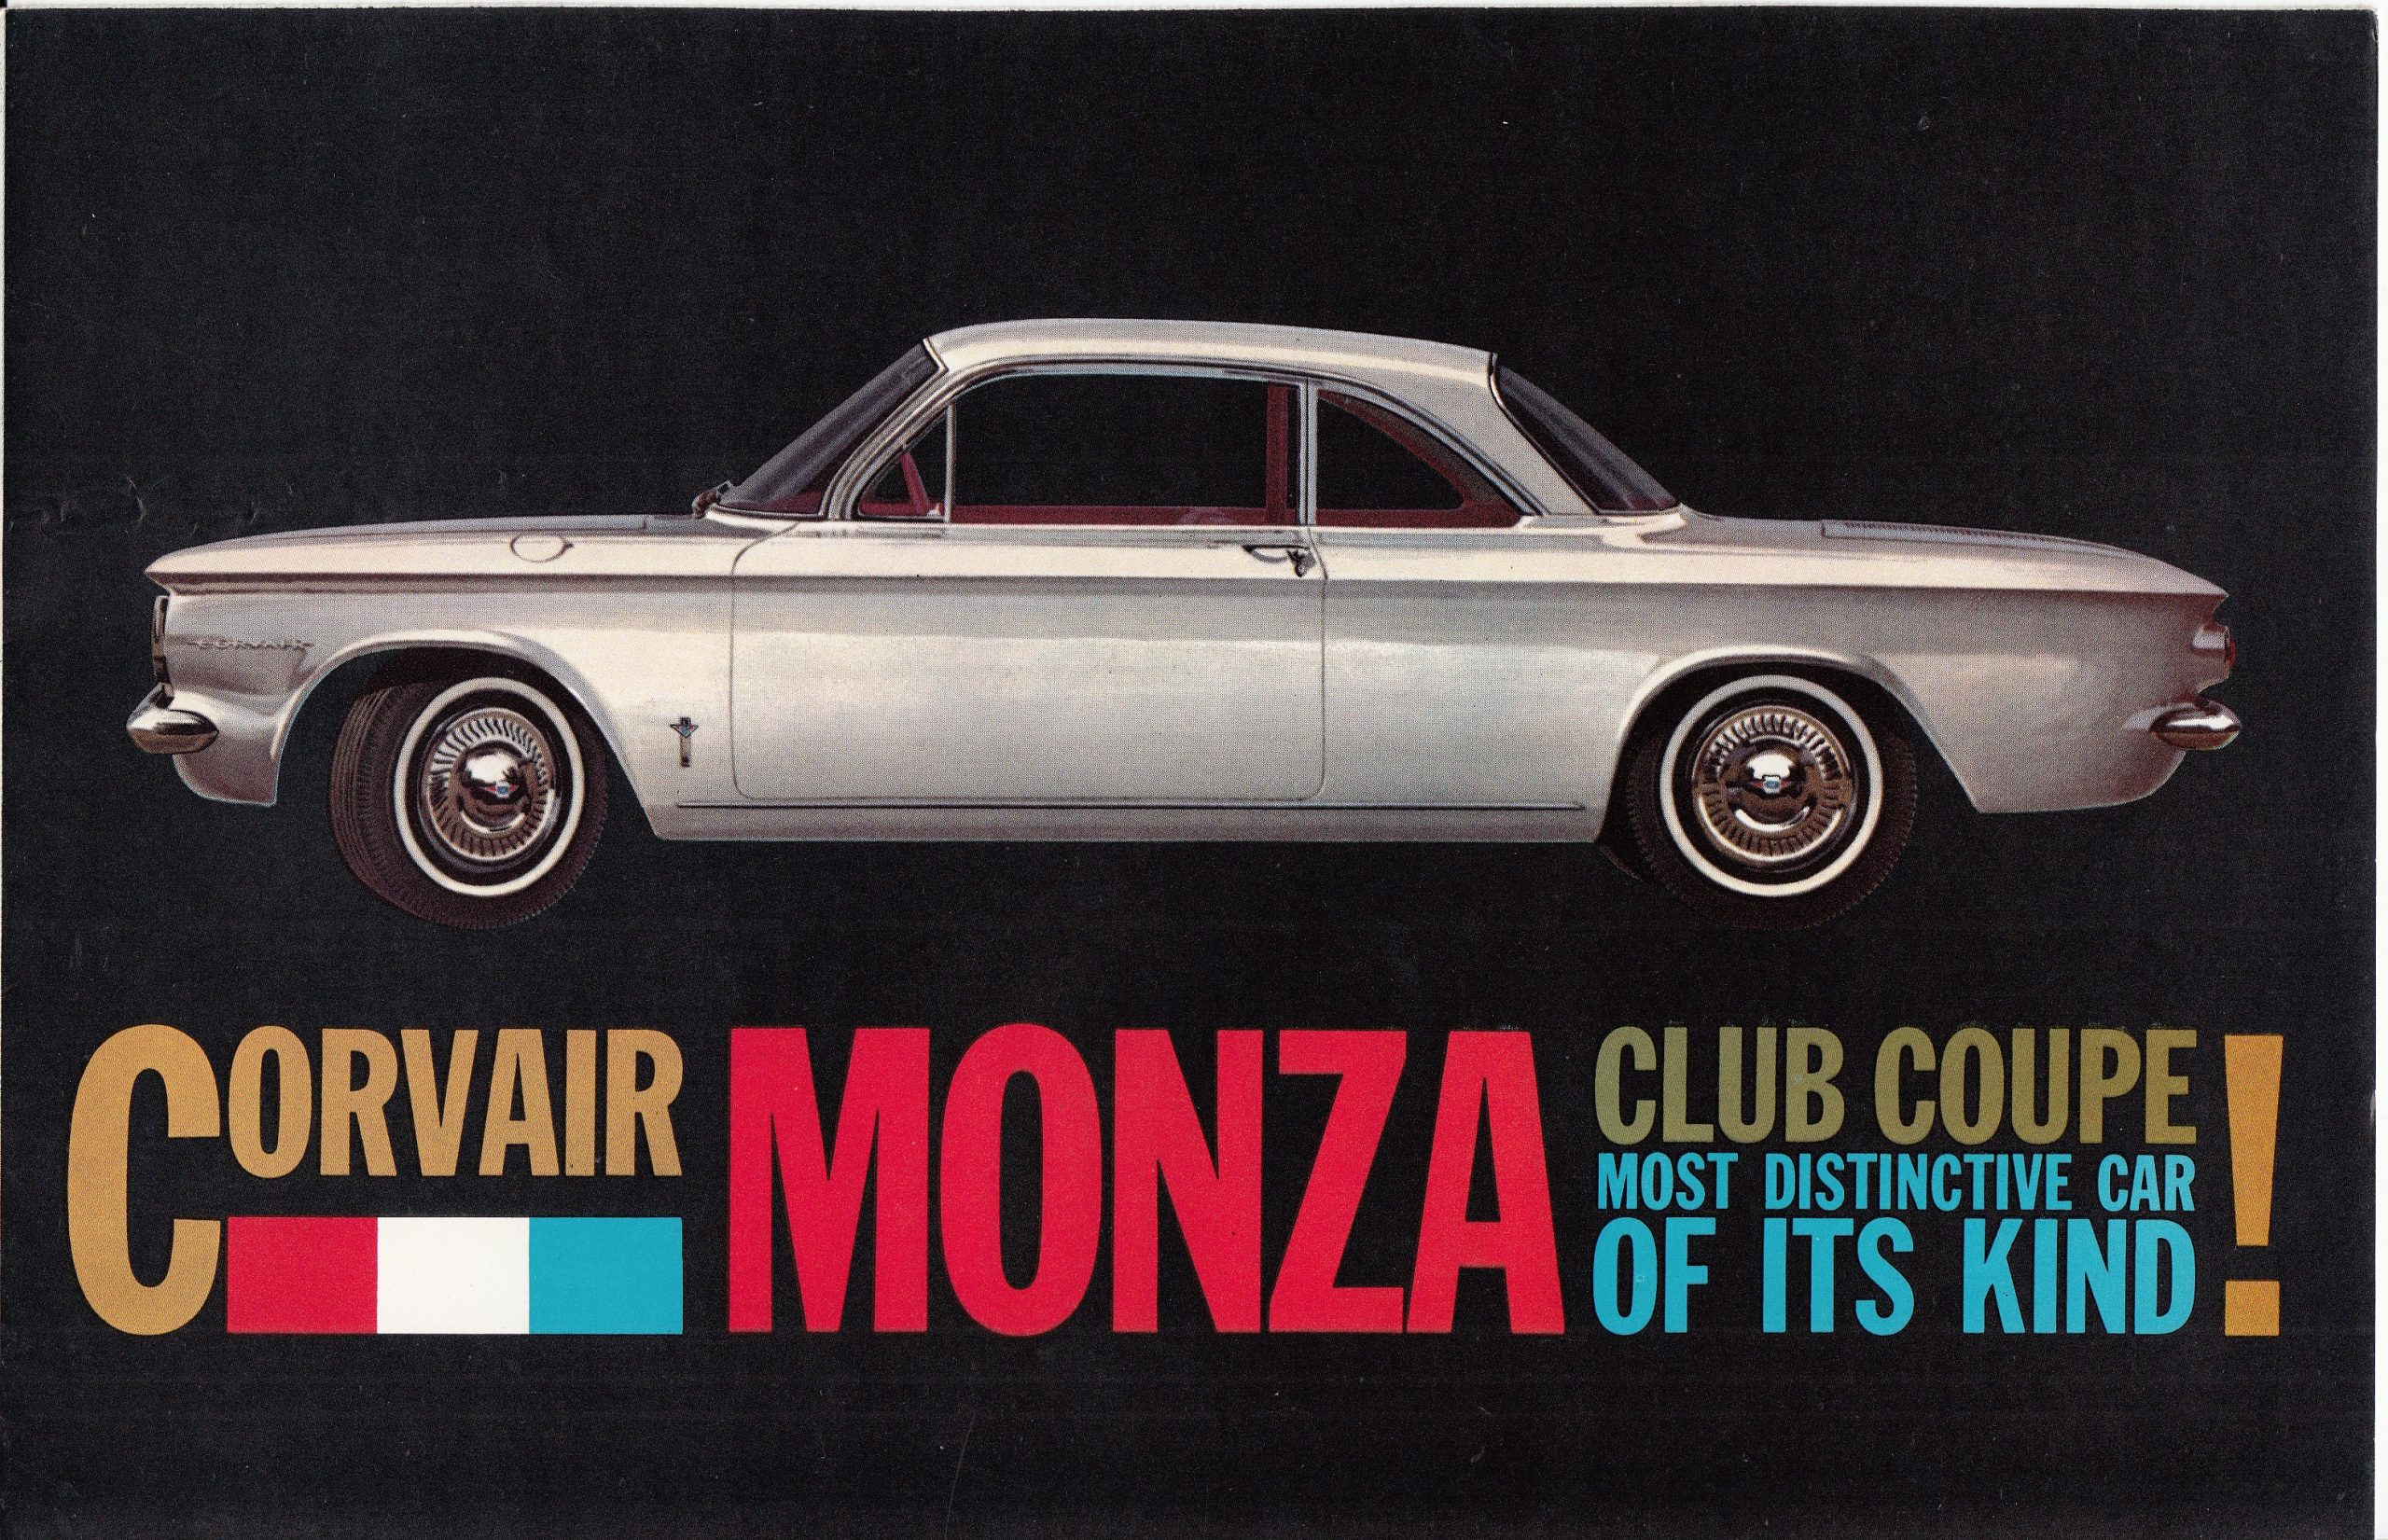 Advertising image of a sports car. Caption reads: ORVAIR MONZA CLUB COUPE MOST DISTINCTIVE CAR OF ITS KIND!